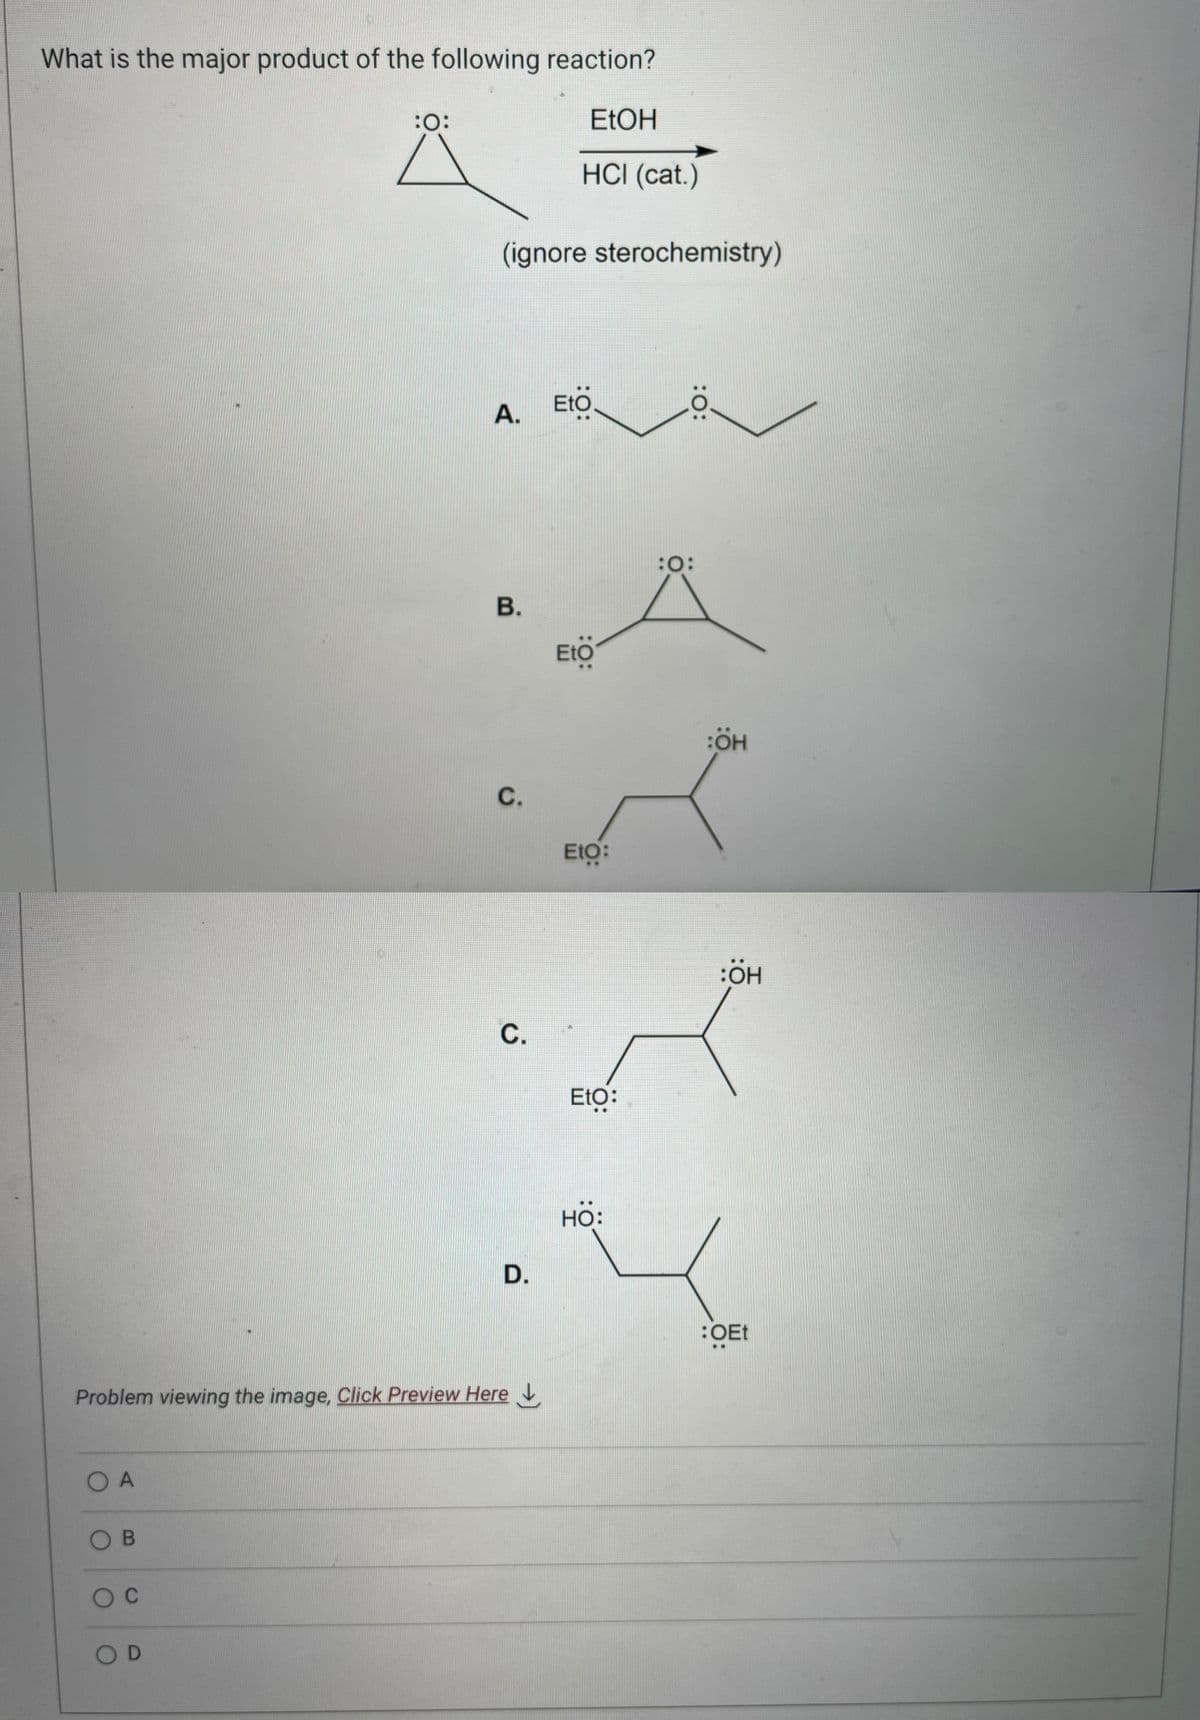 What is the major product of the following reaction?
EtOH
HCI (cat.)
O A
OB
O C
:O:
OD
(ignore sterochemistry)
A. Eto.
B.
Problem viewing the image. Click Preview Here
C.
C.
D.
:O:
Eto:
Eto:
HO:
:0:
:O:
:ÖH
:ÖH
:OEt